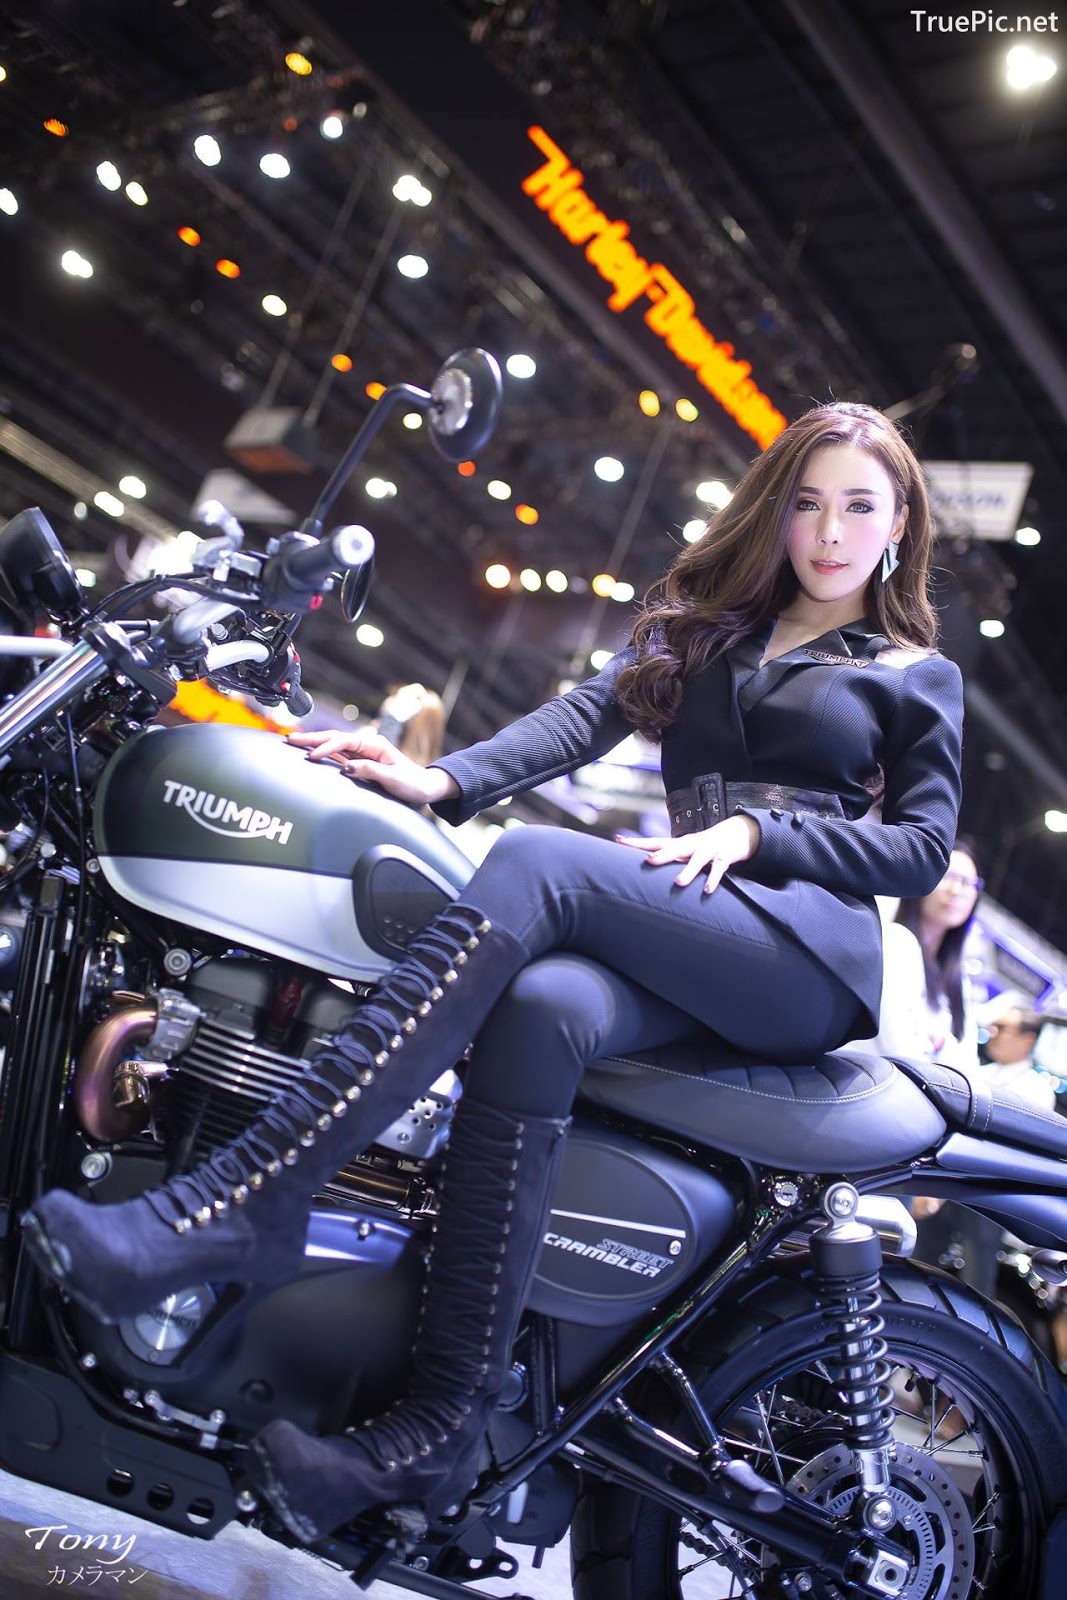 Image-Thailand-Hot-Model-Thai-Racing-Girl-At-Motor-Expo-2018-TruePic.net- Picture-65